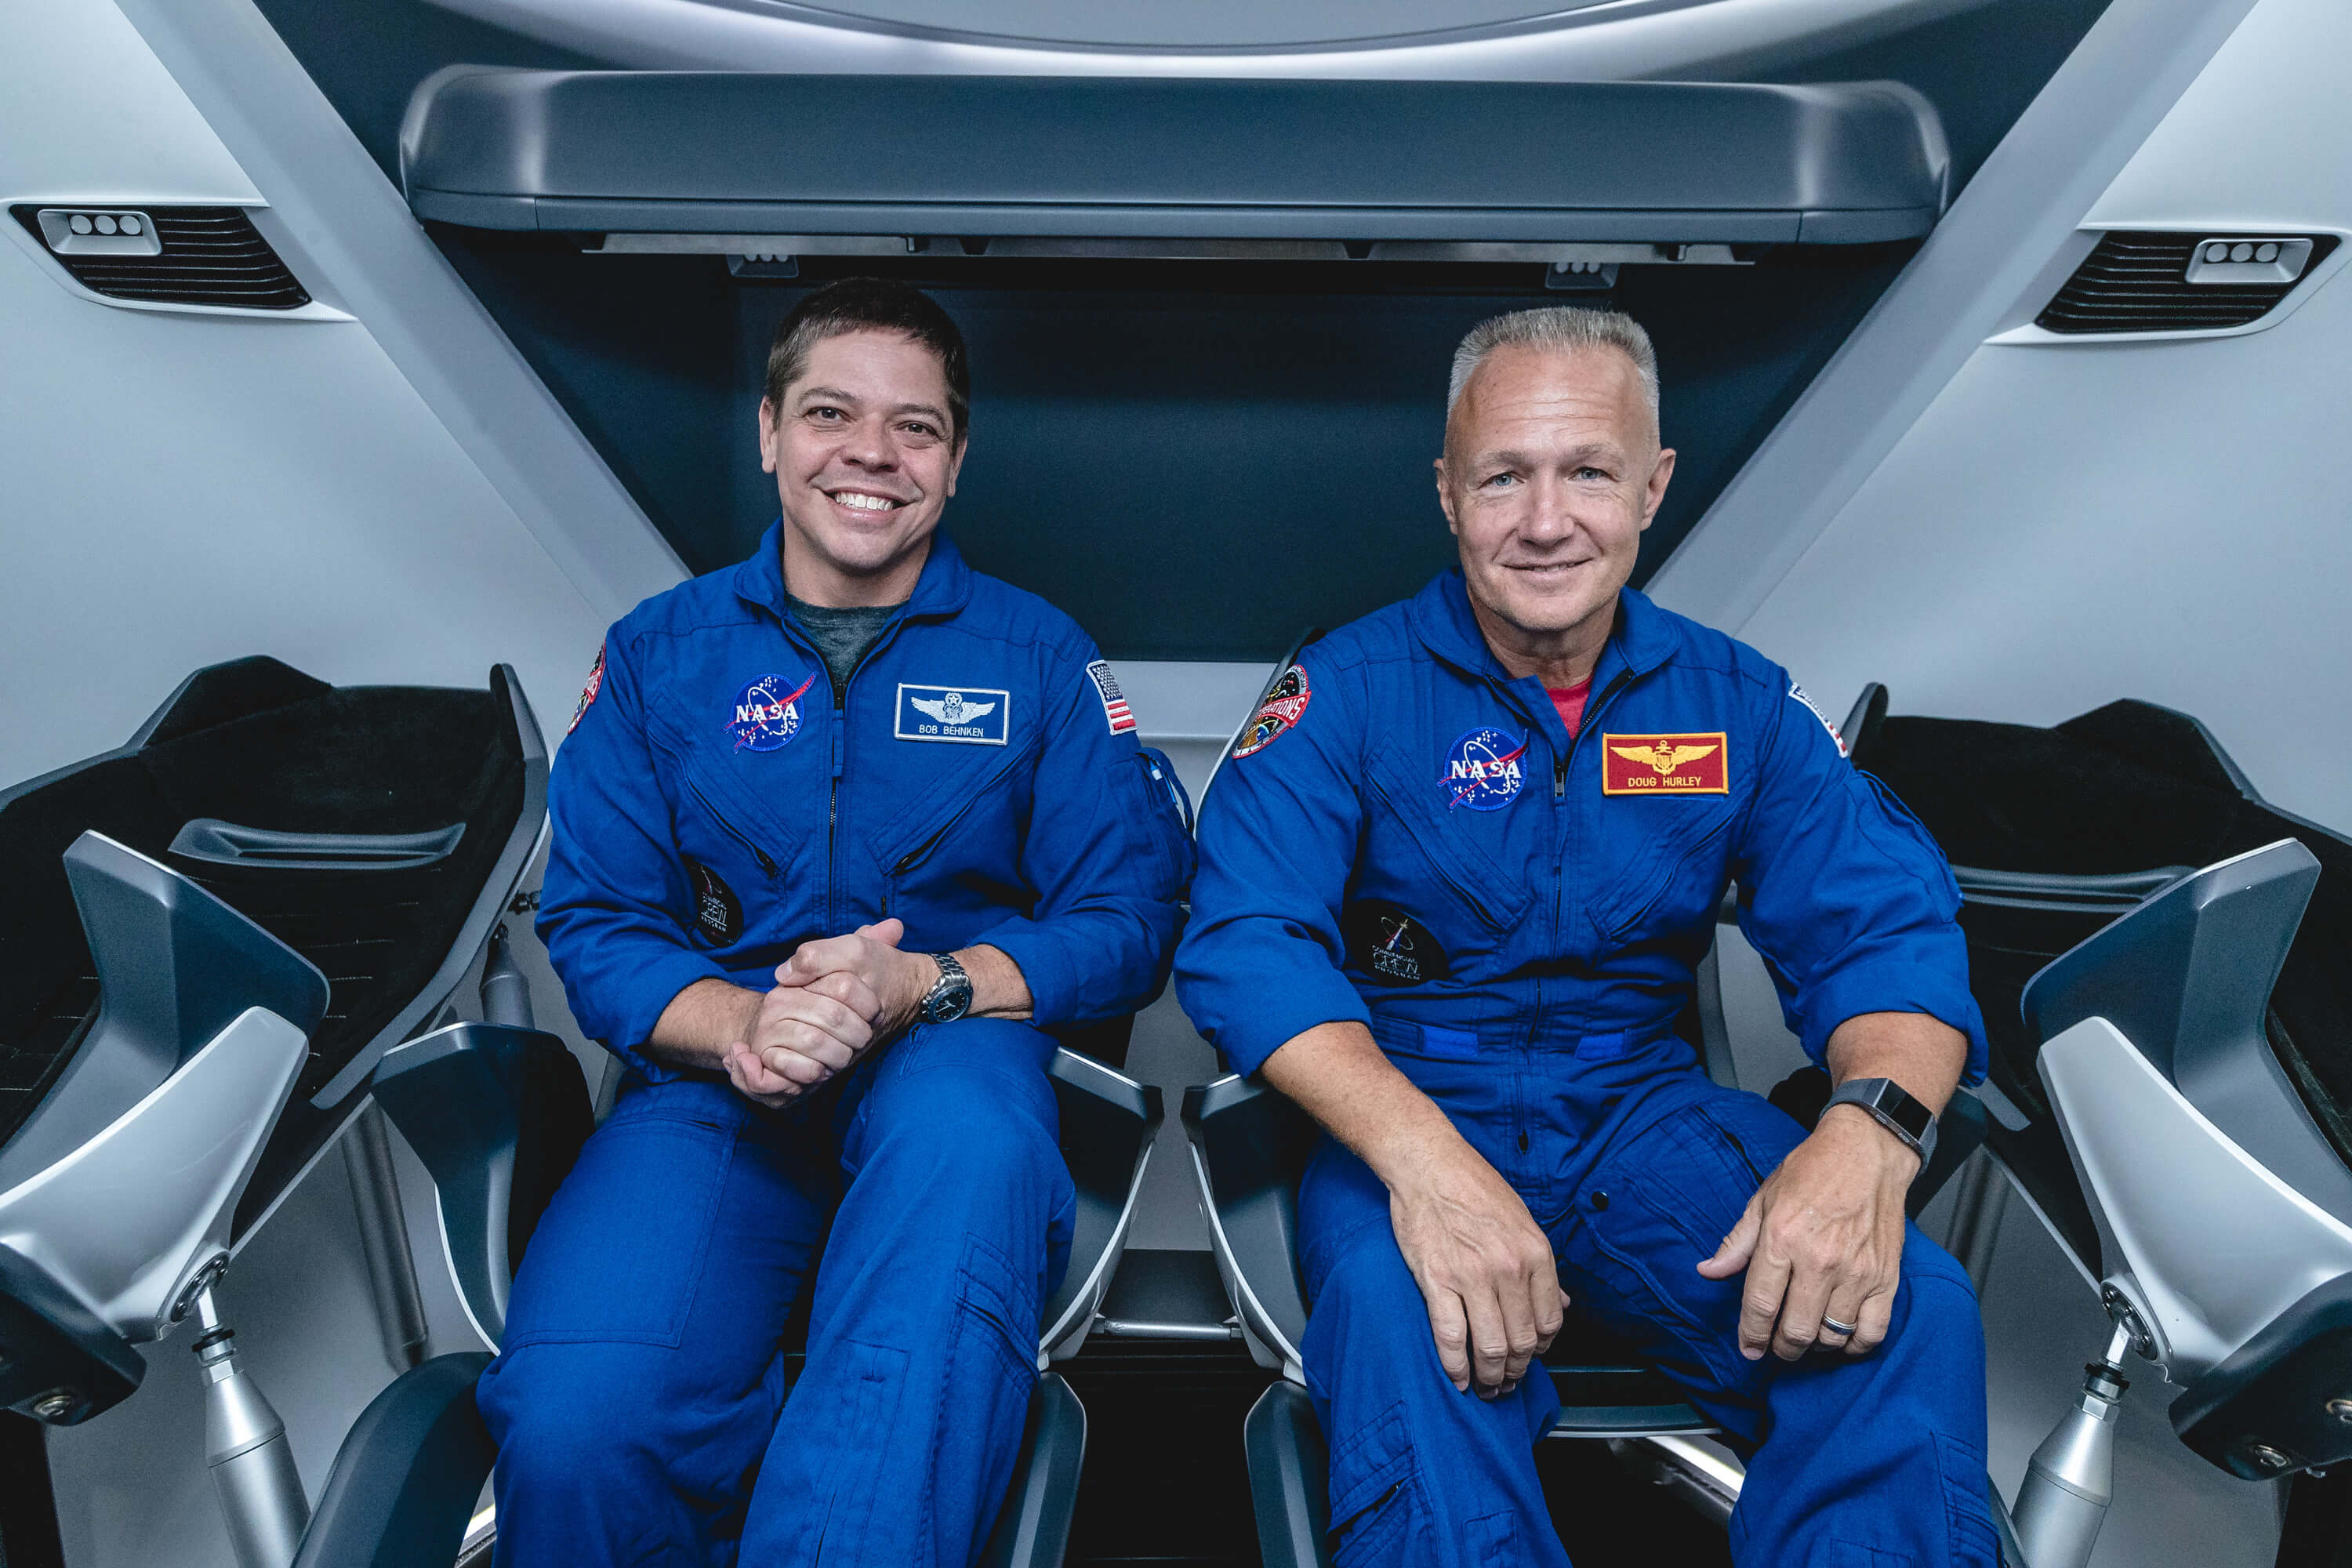 SpaceX plans to launch the first space mission with people aboard the Crew Dragon in the spring of 2020